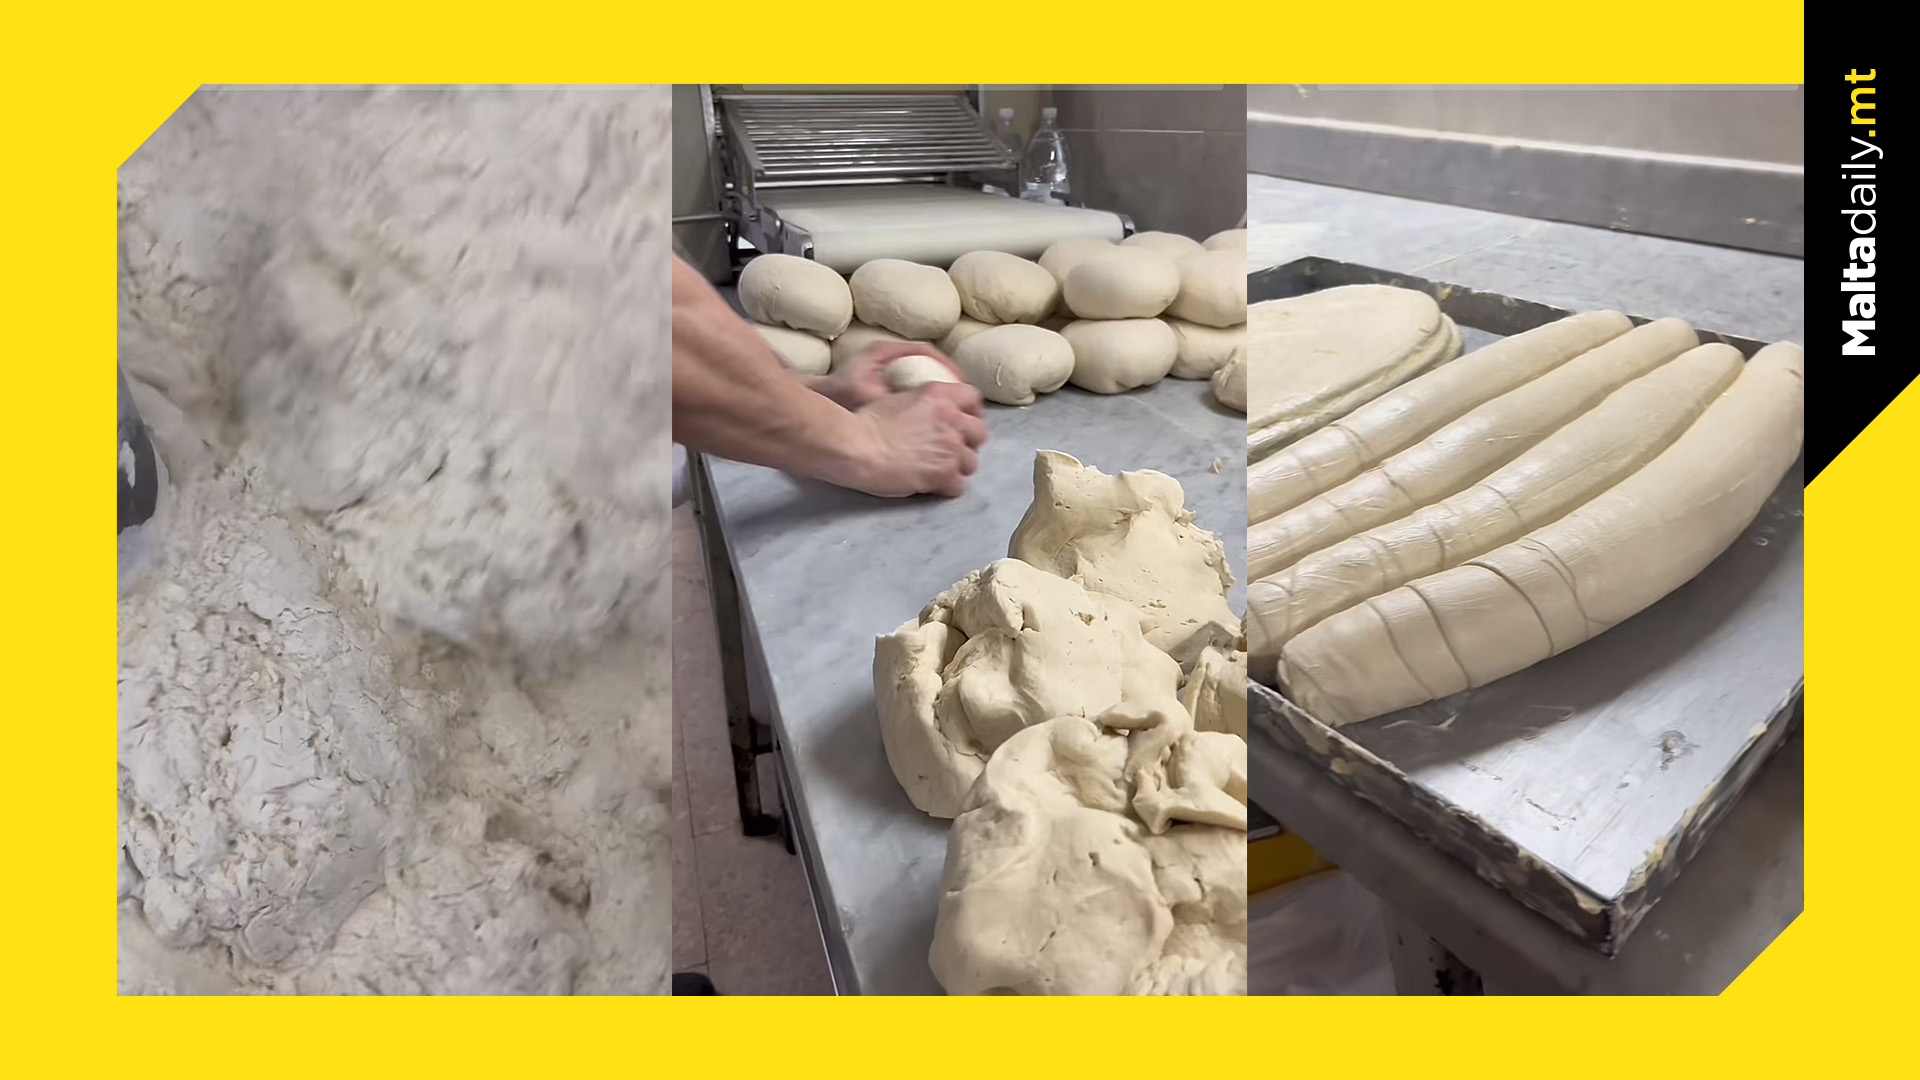 Viral pastizzi maker posts new video showing the process behind the iconic pastizz